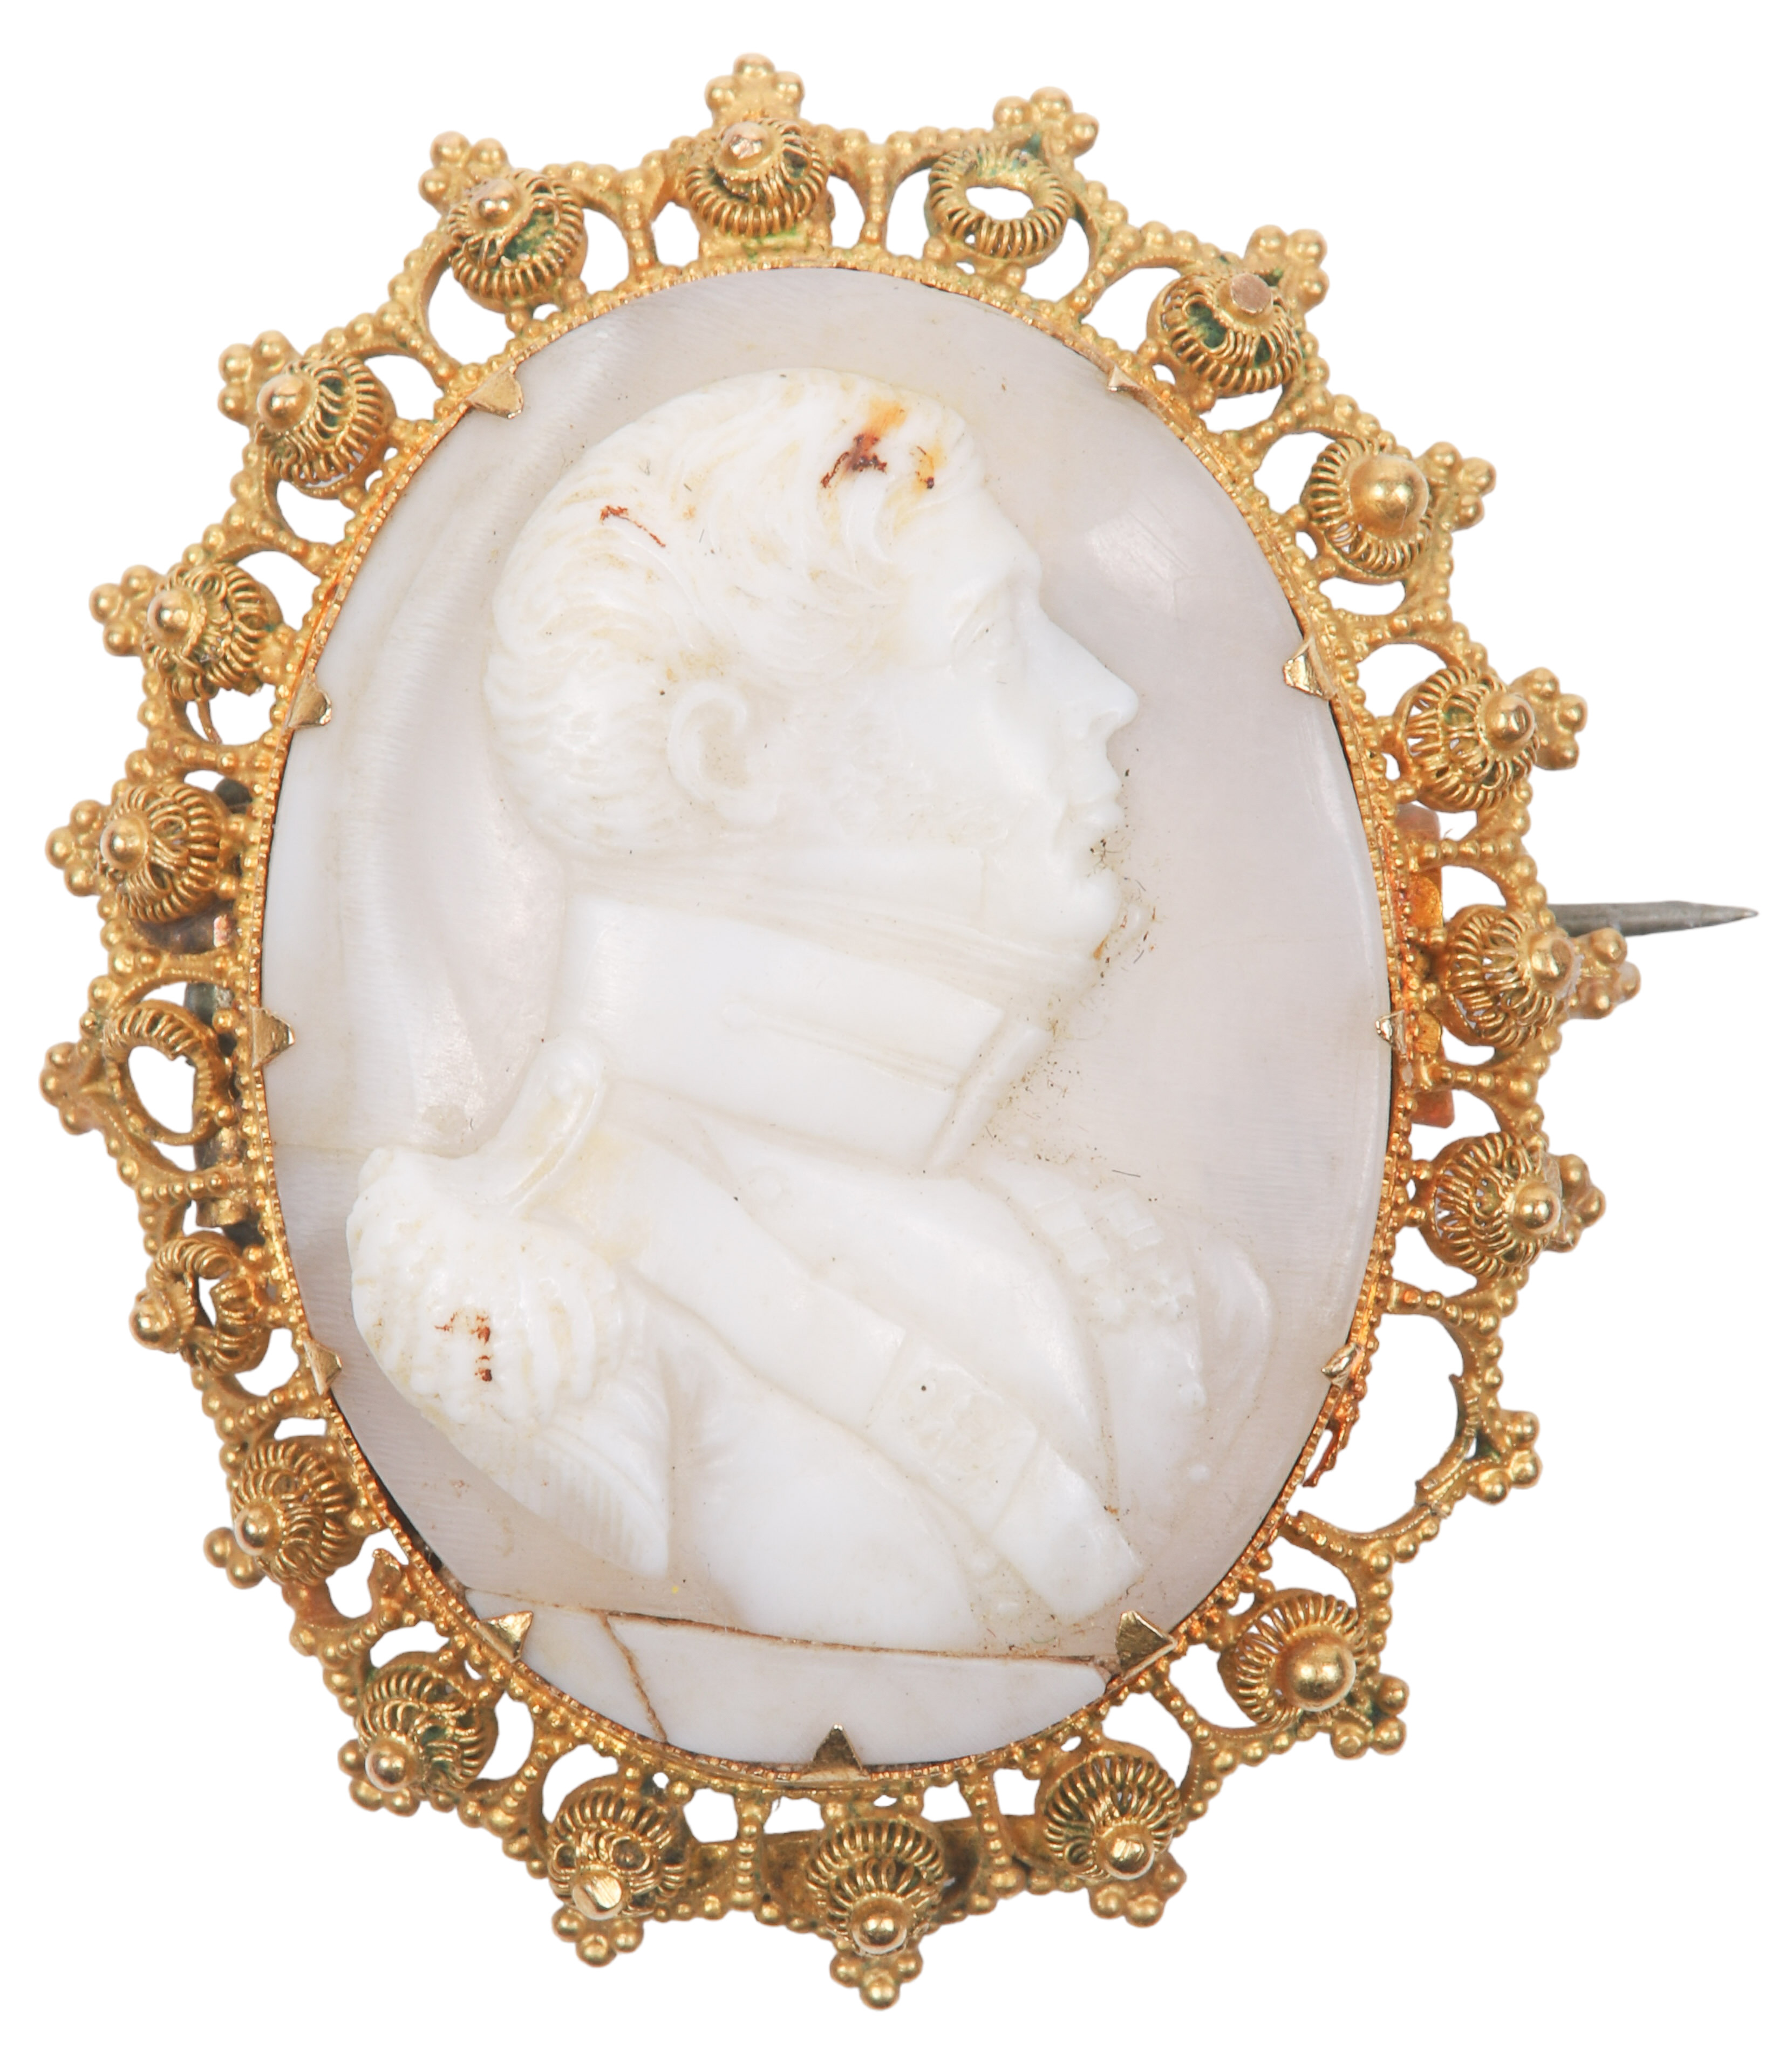 Shell carved cameo of King Charles 2e1c0d